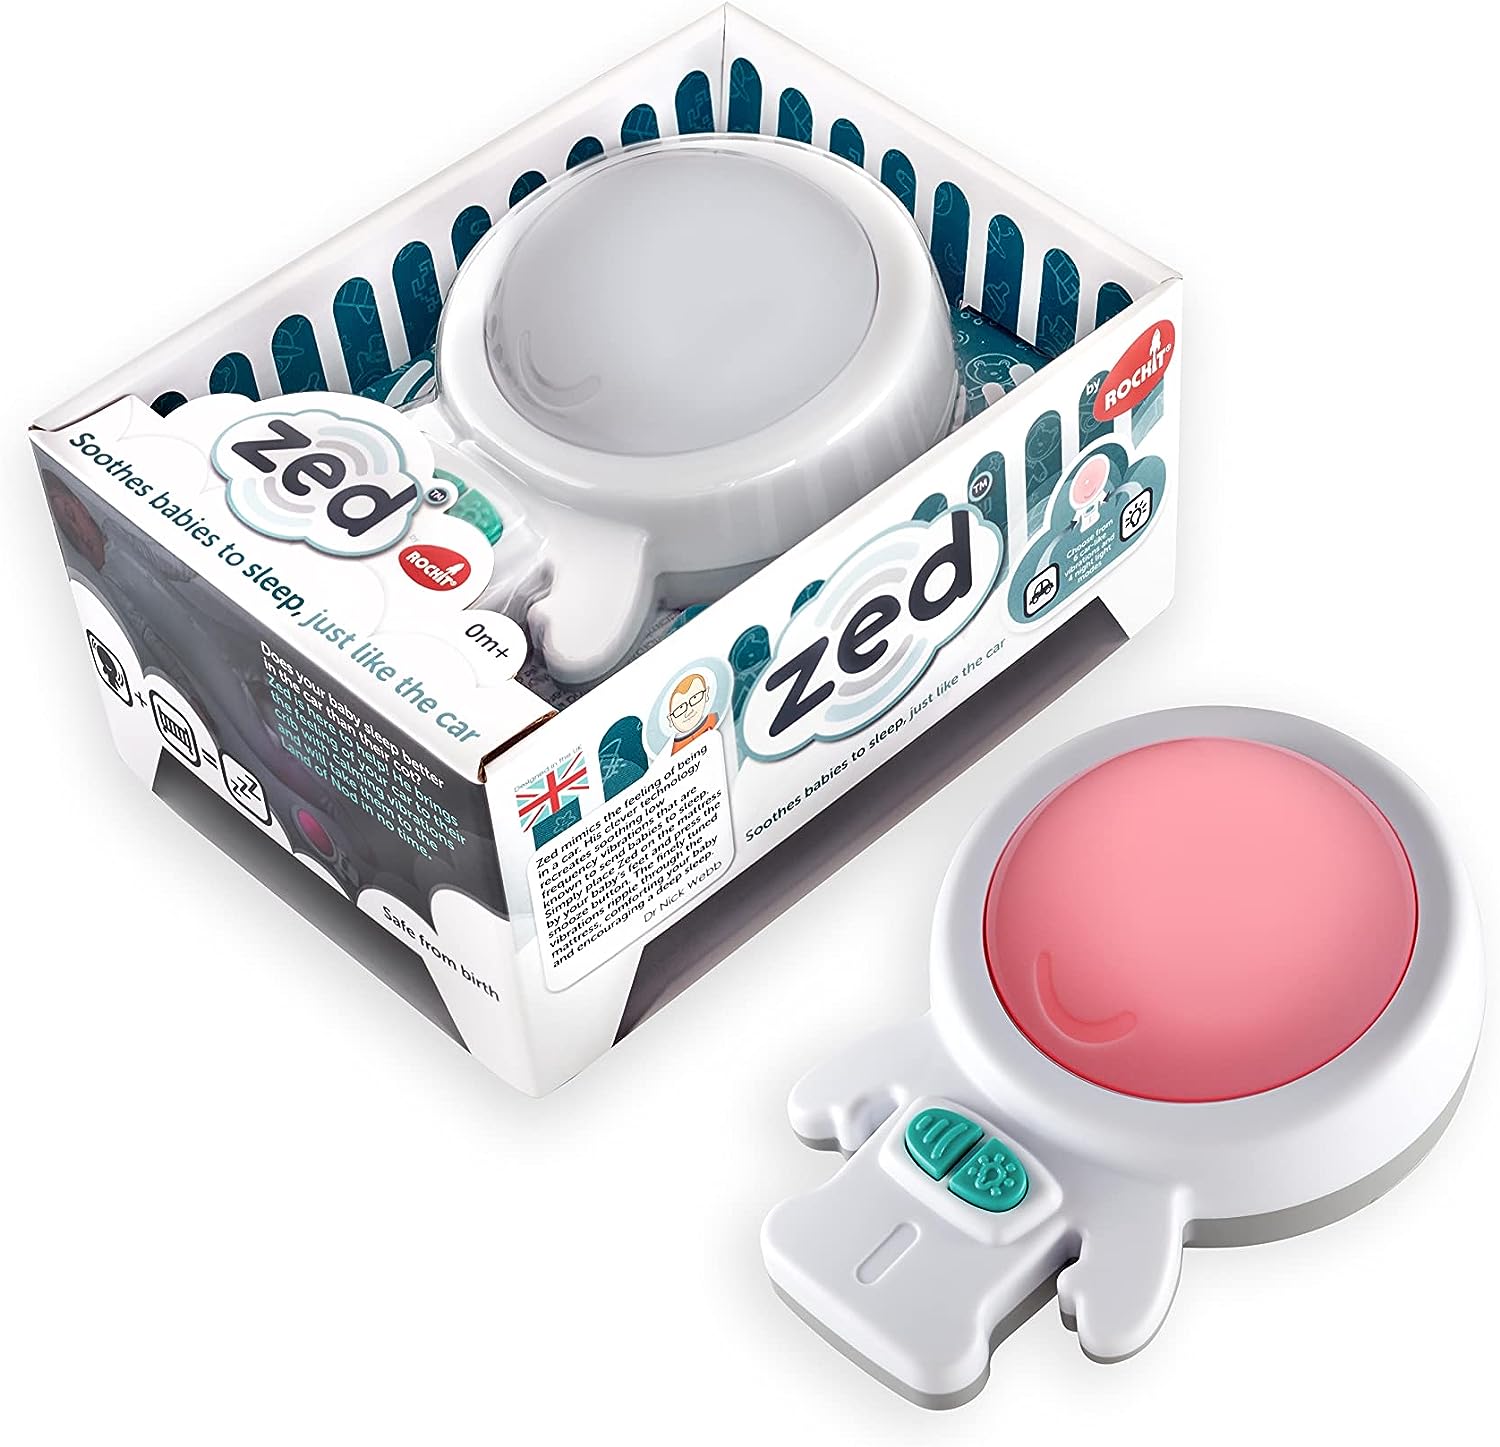 The  Zed: Baby Sleep aid with Calming Vibration, featured in our guide to the best baby sleep aids